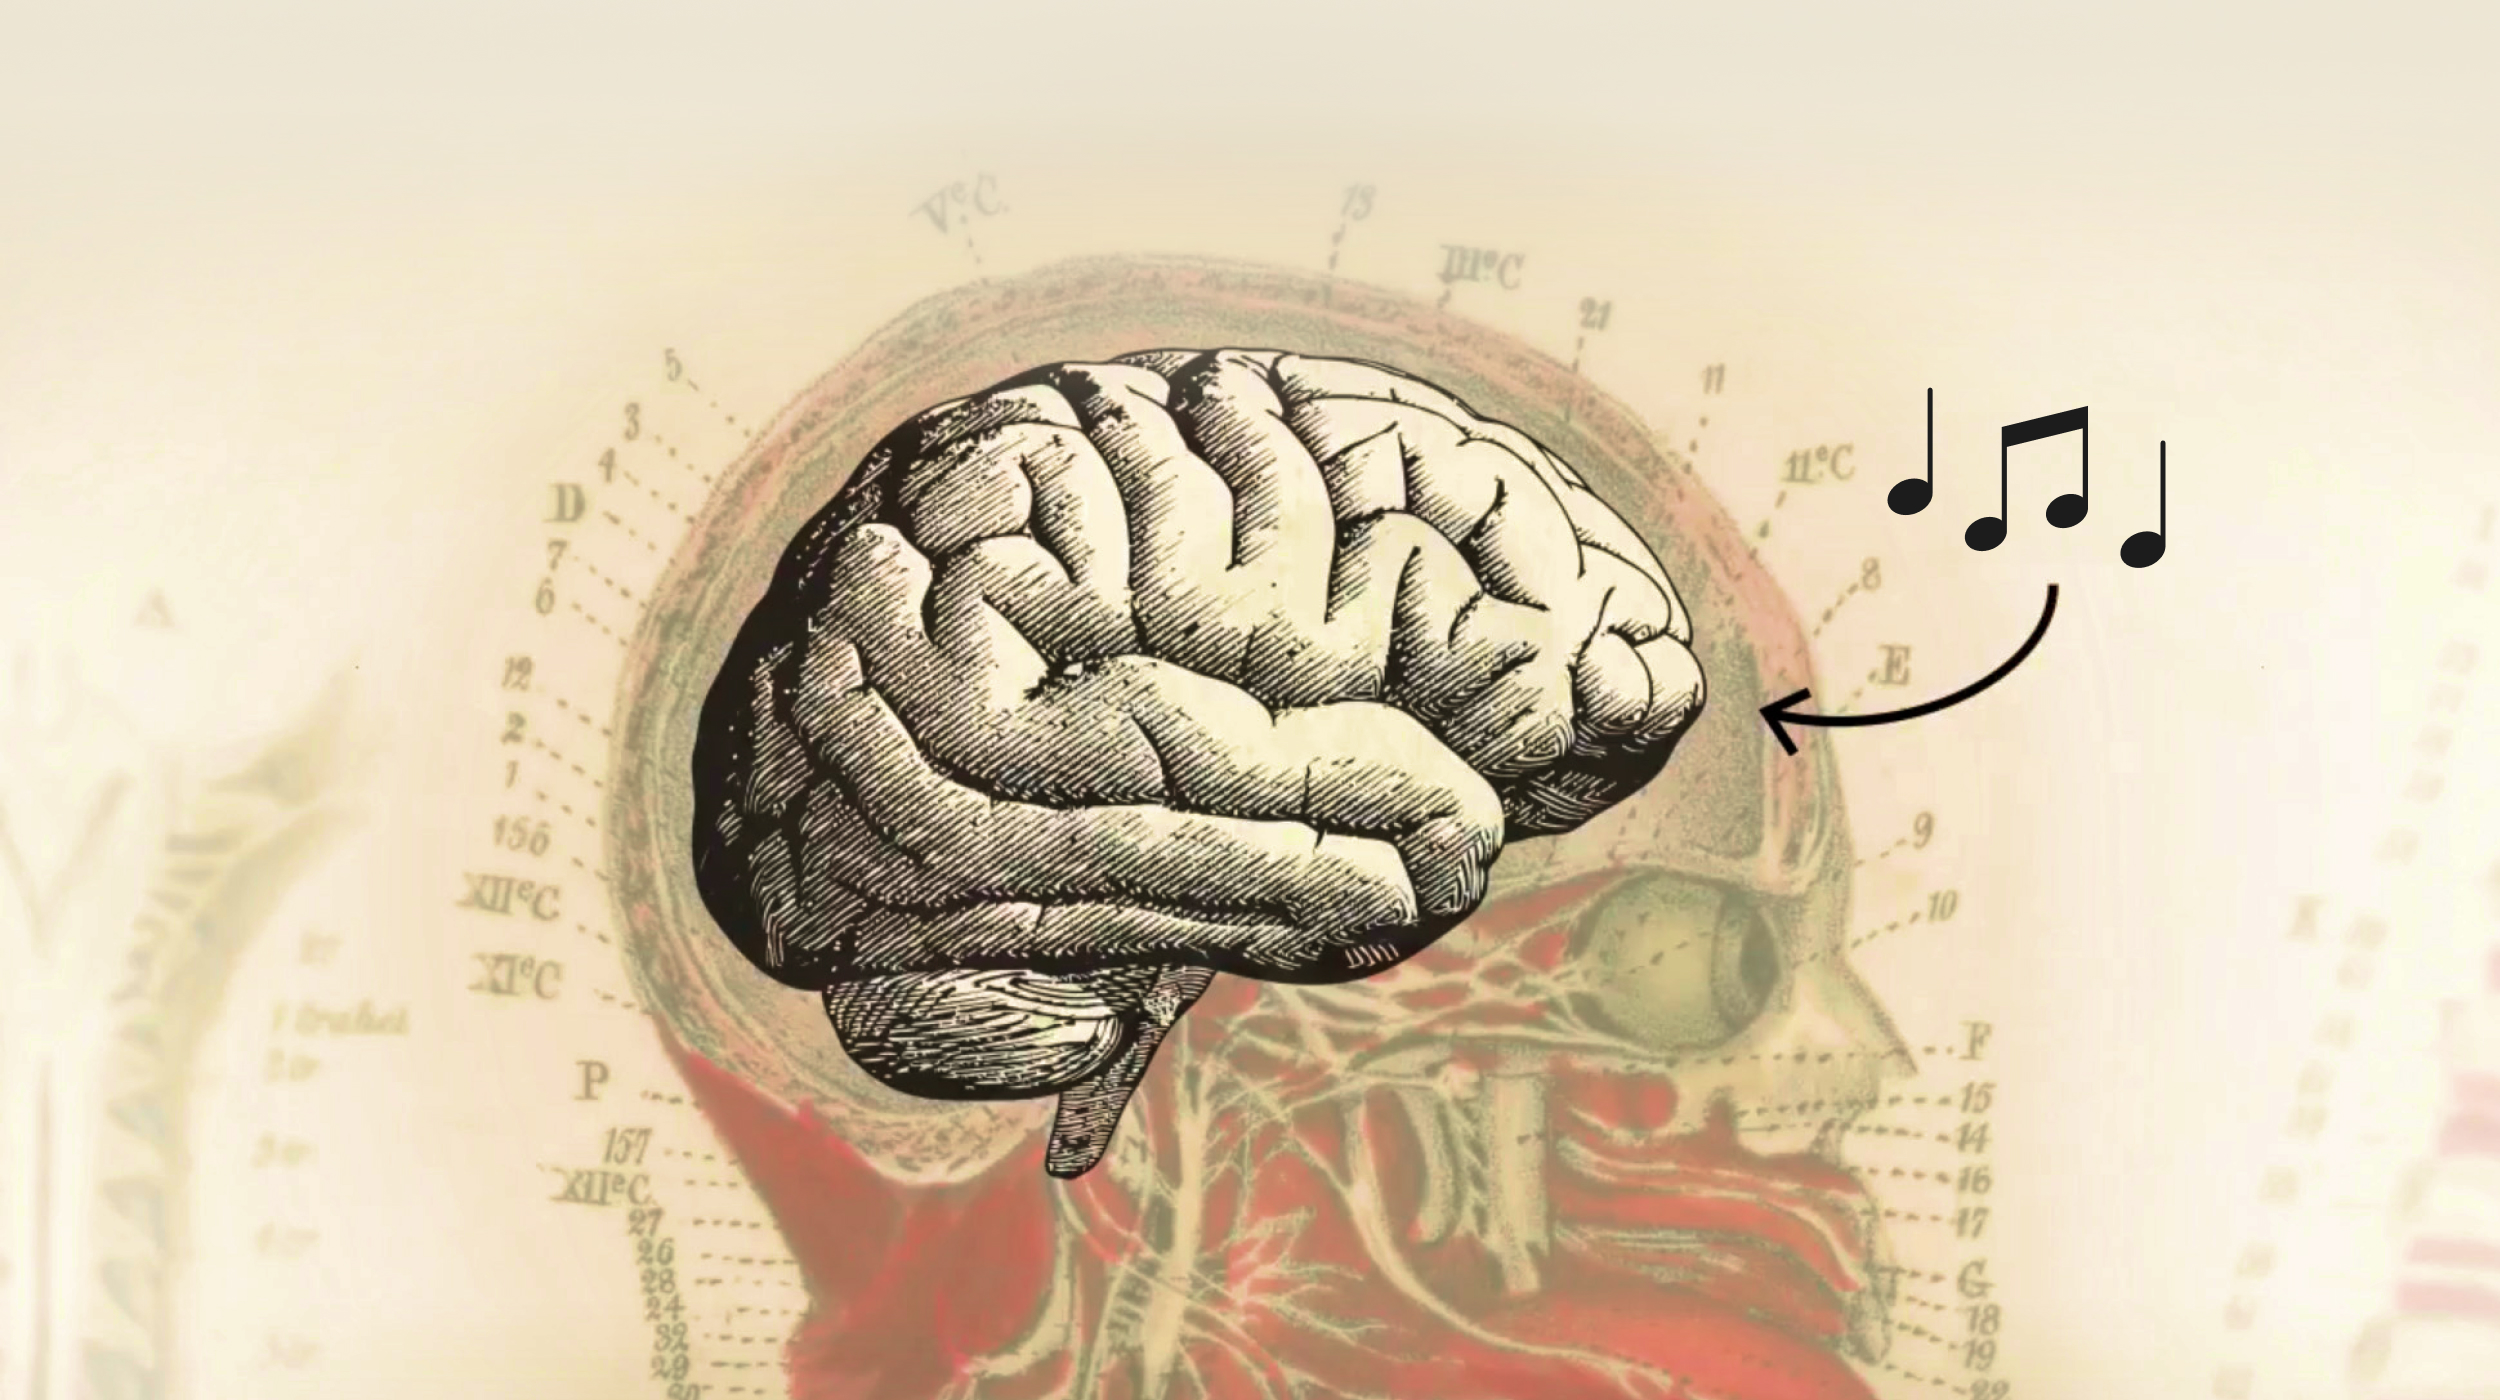 An illustrated human brain with musical notes to suggest the concept of music and cognition against a vintage anatomical background.